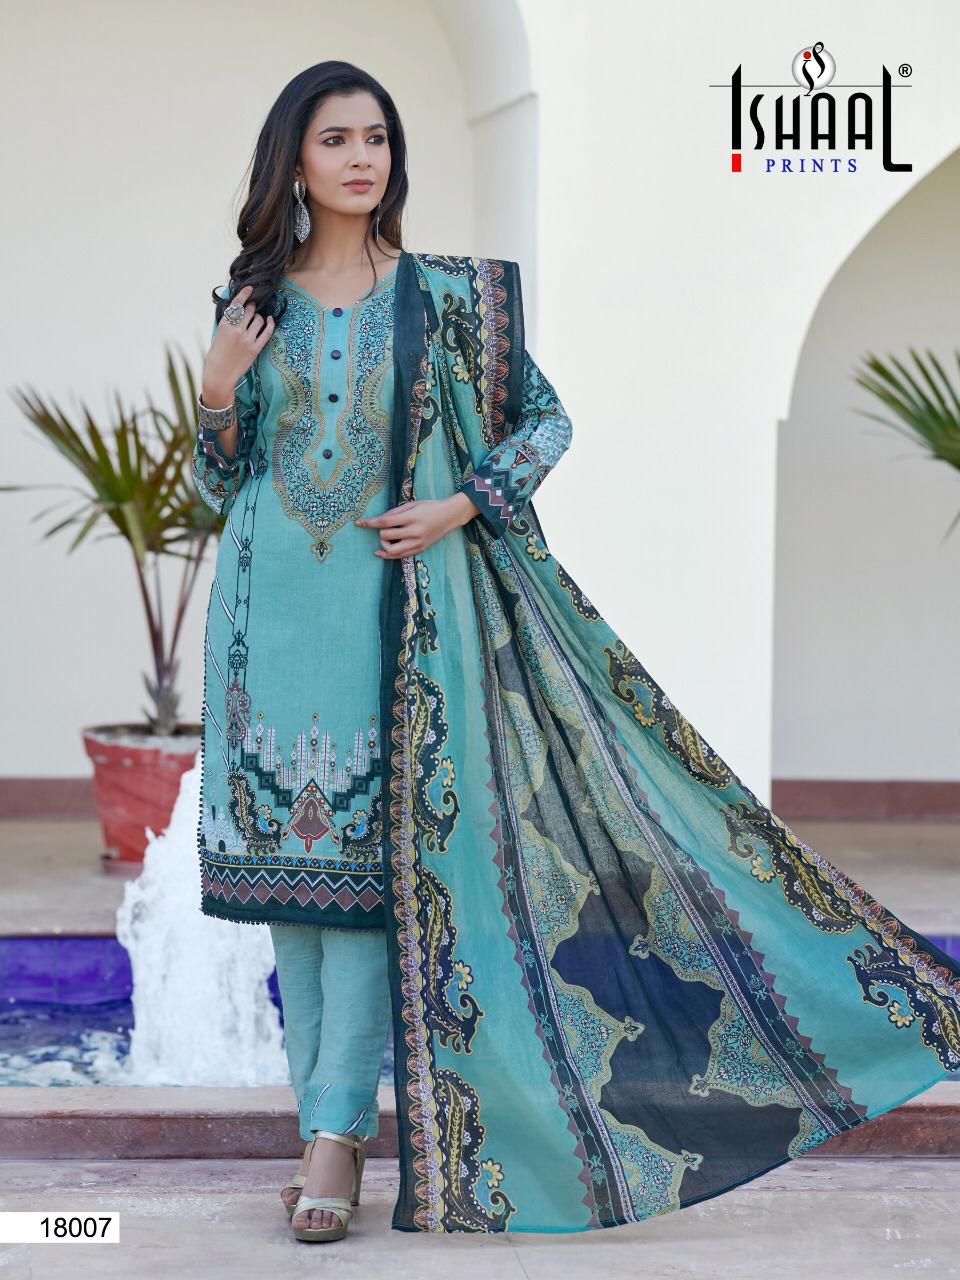 Ishaal Prints Gulmohar Vol 18 Catalog Pure Lawn Summer Wear Suits Collection Wholesale Price